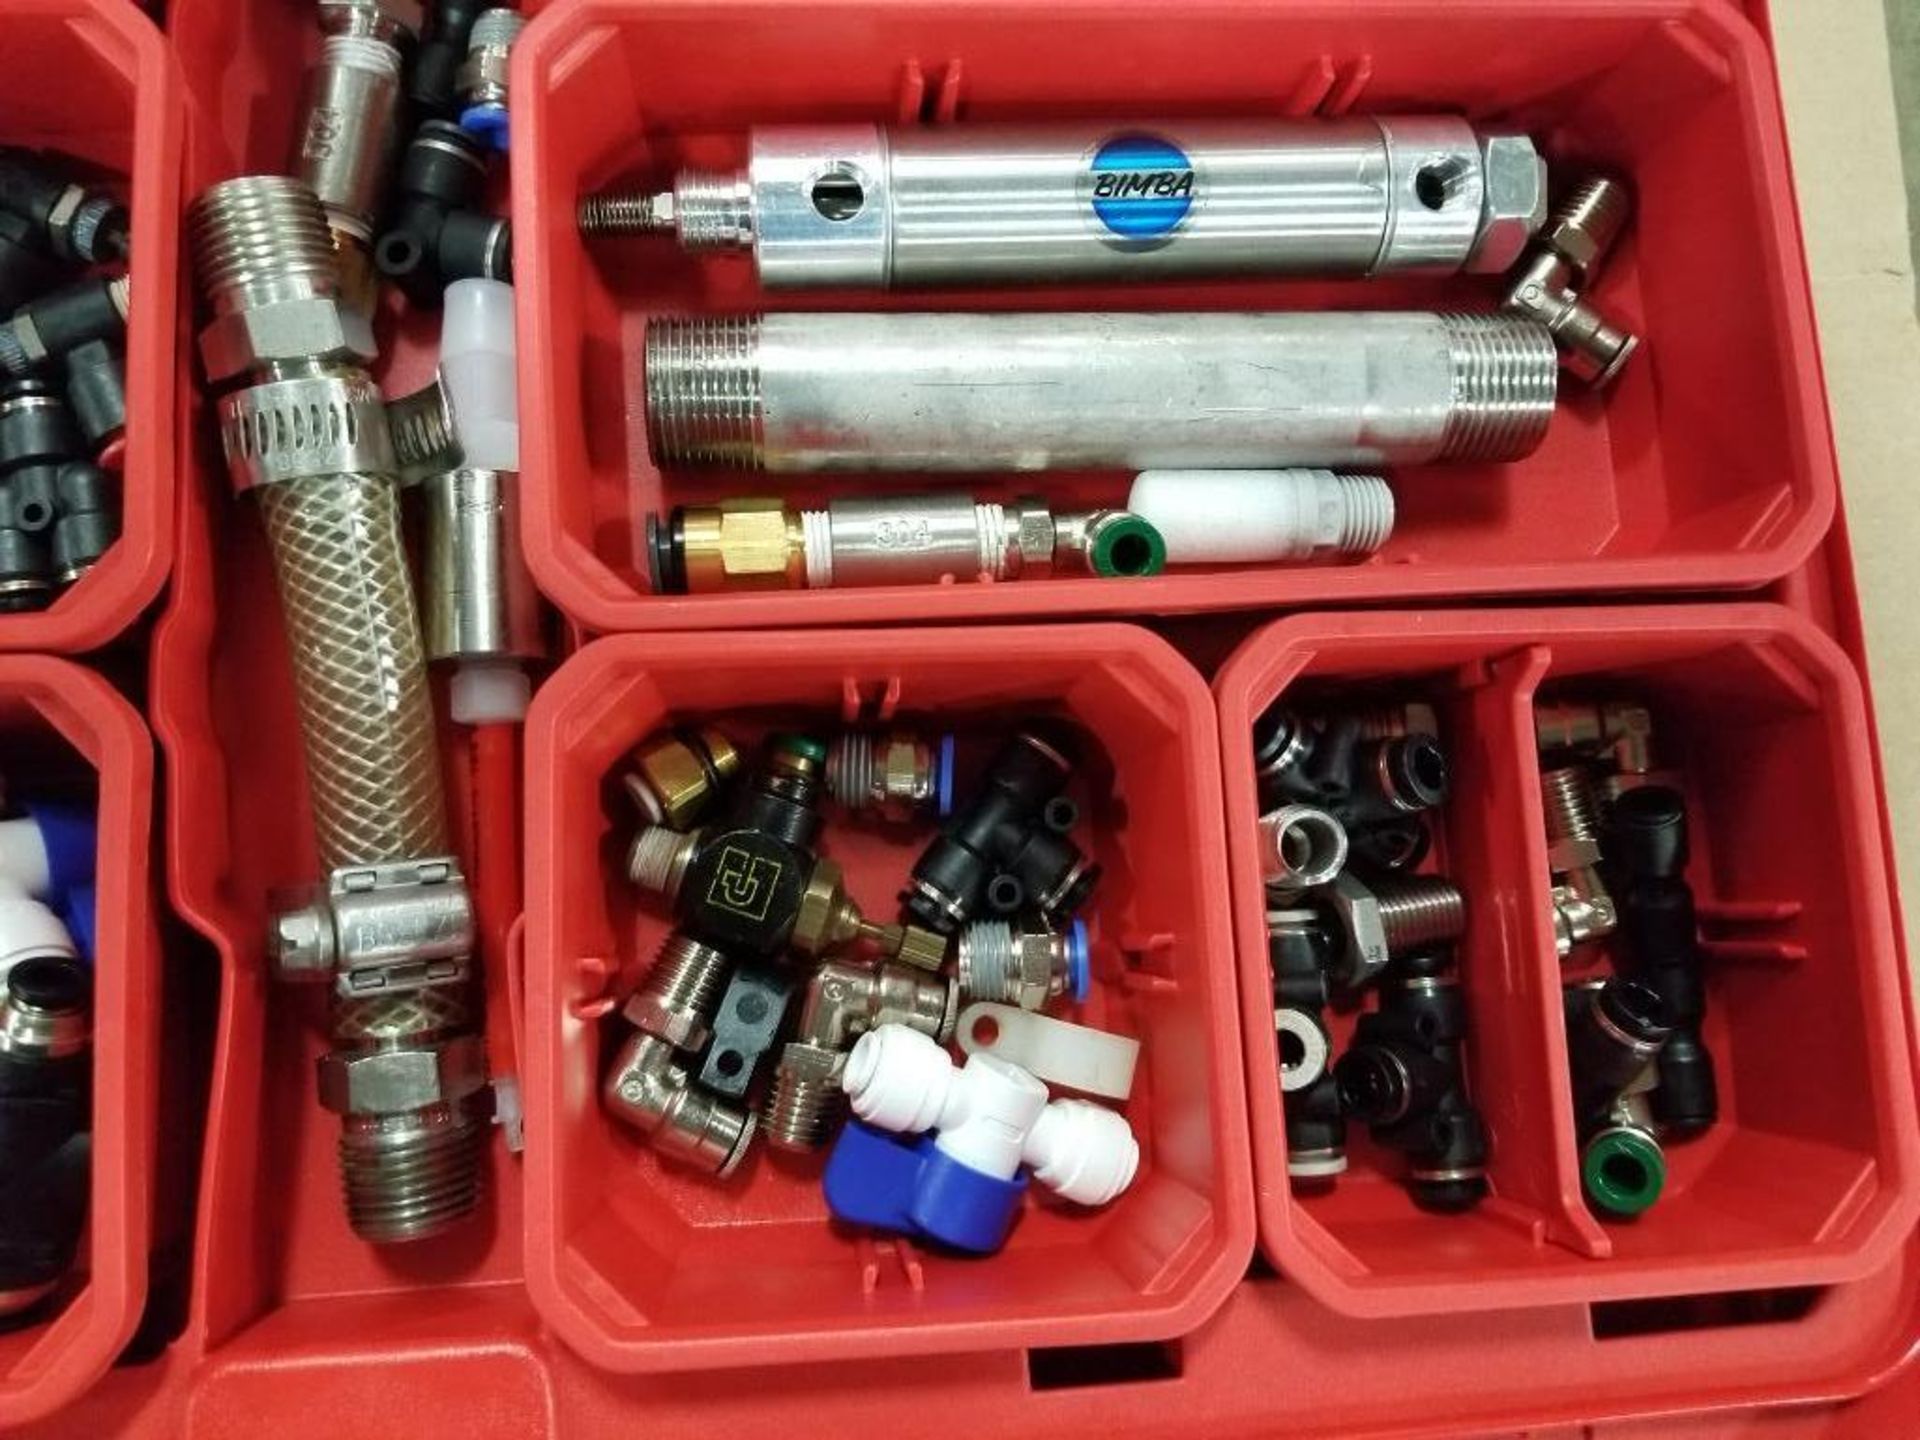 Qty 2 - Storage case with replacement air line/pneumatic fittings, cylinders. - Image 17 of 30